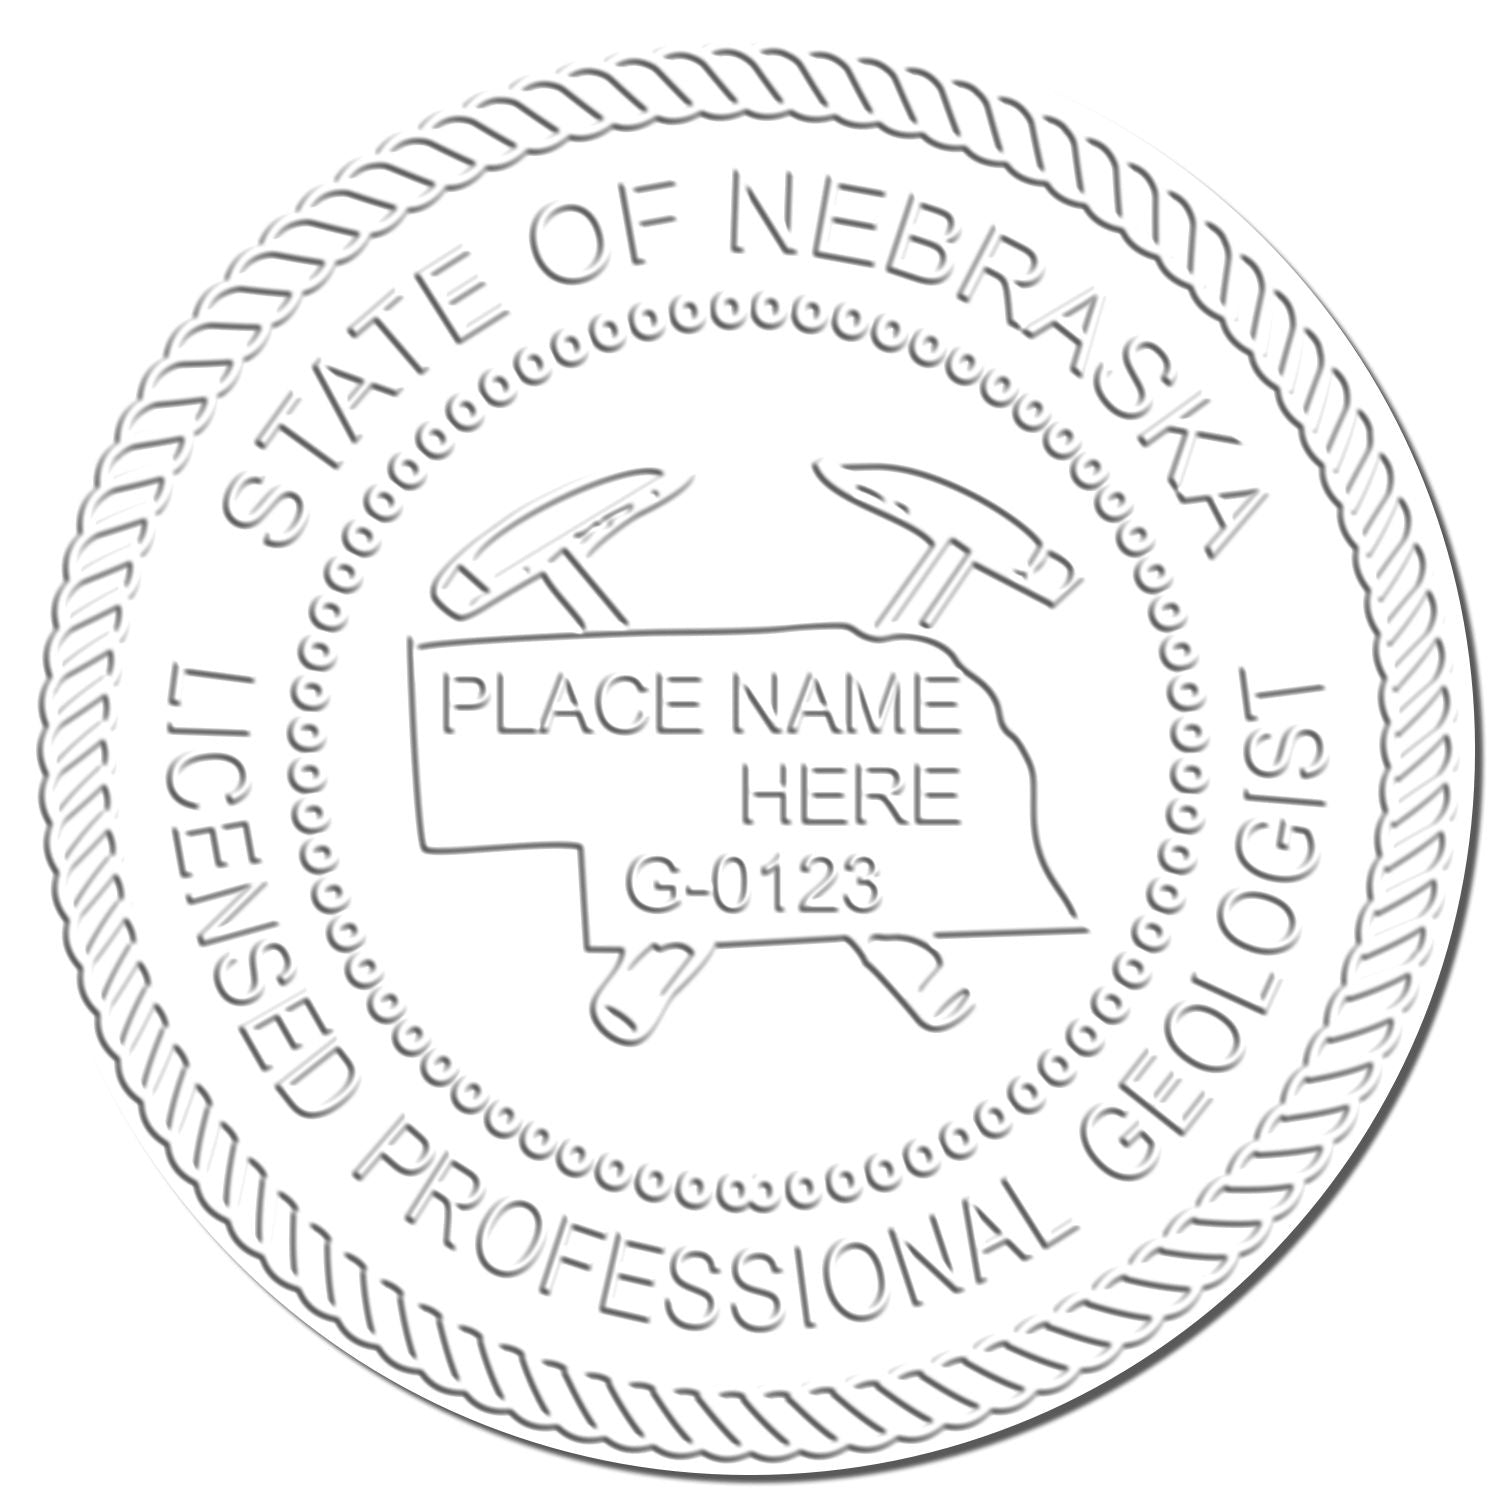 The main image for the Nebraska Geologist Desk Seal depicting a sample of the imprint and imprint sample